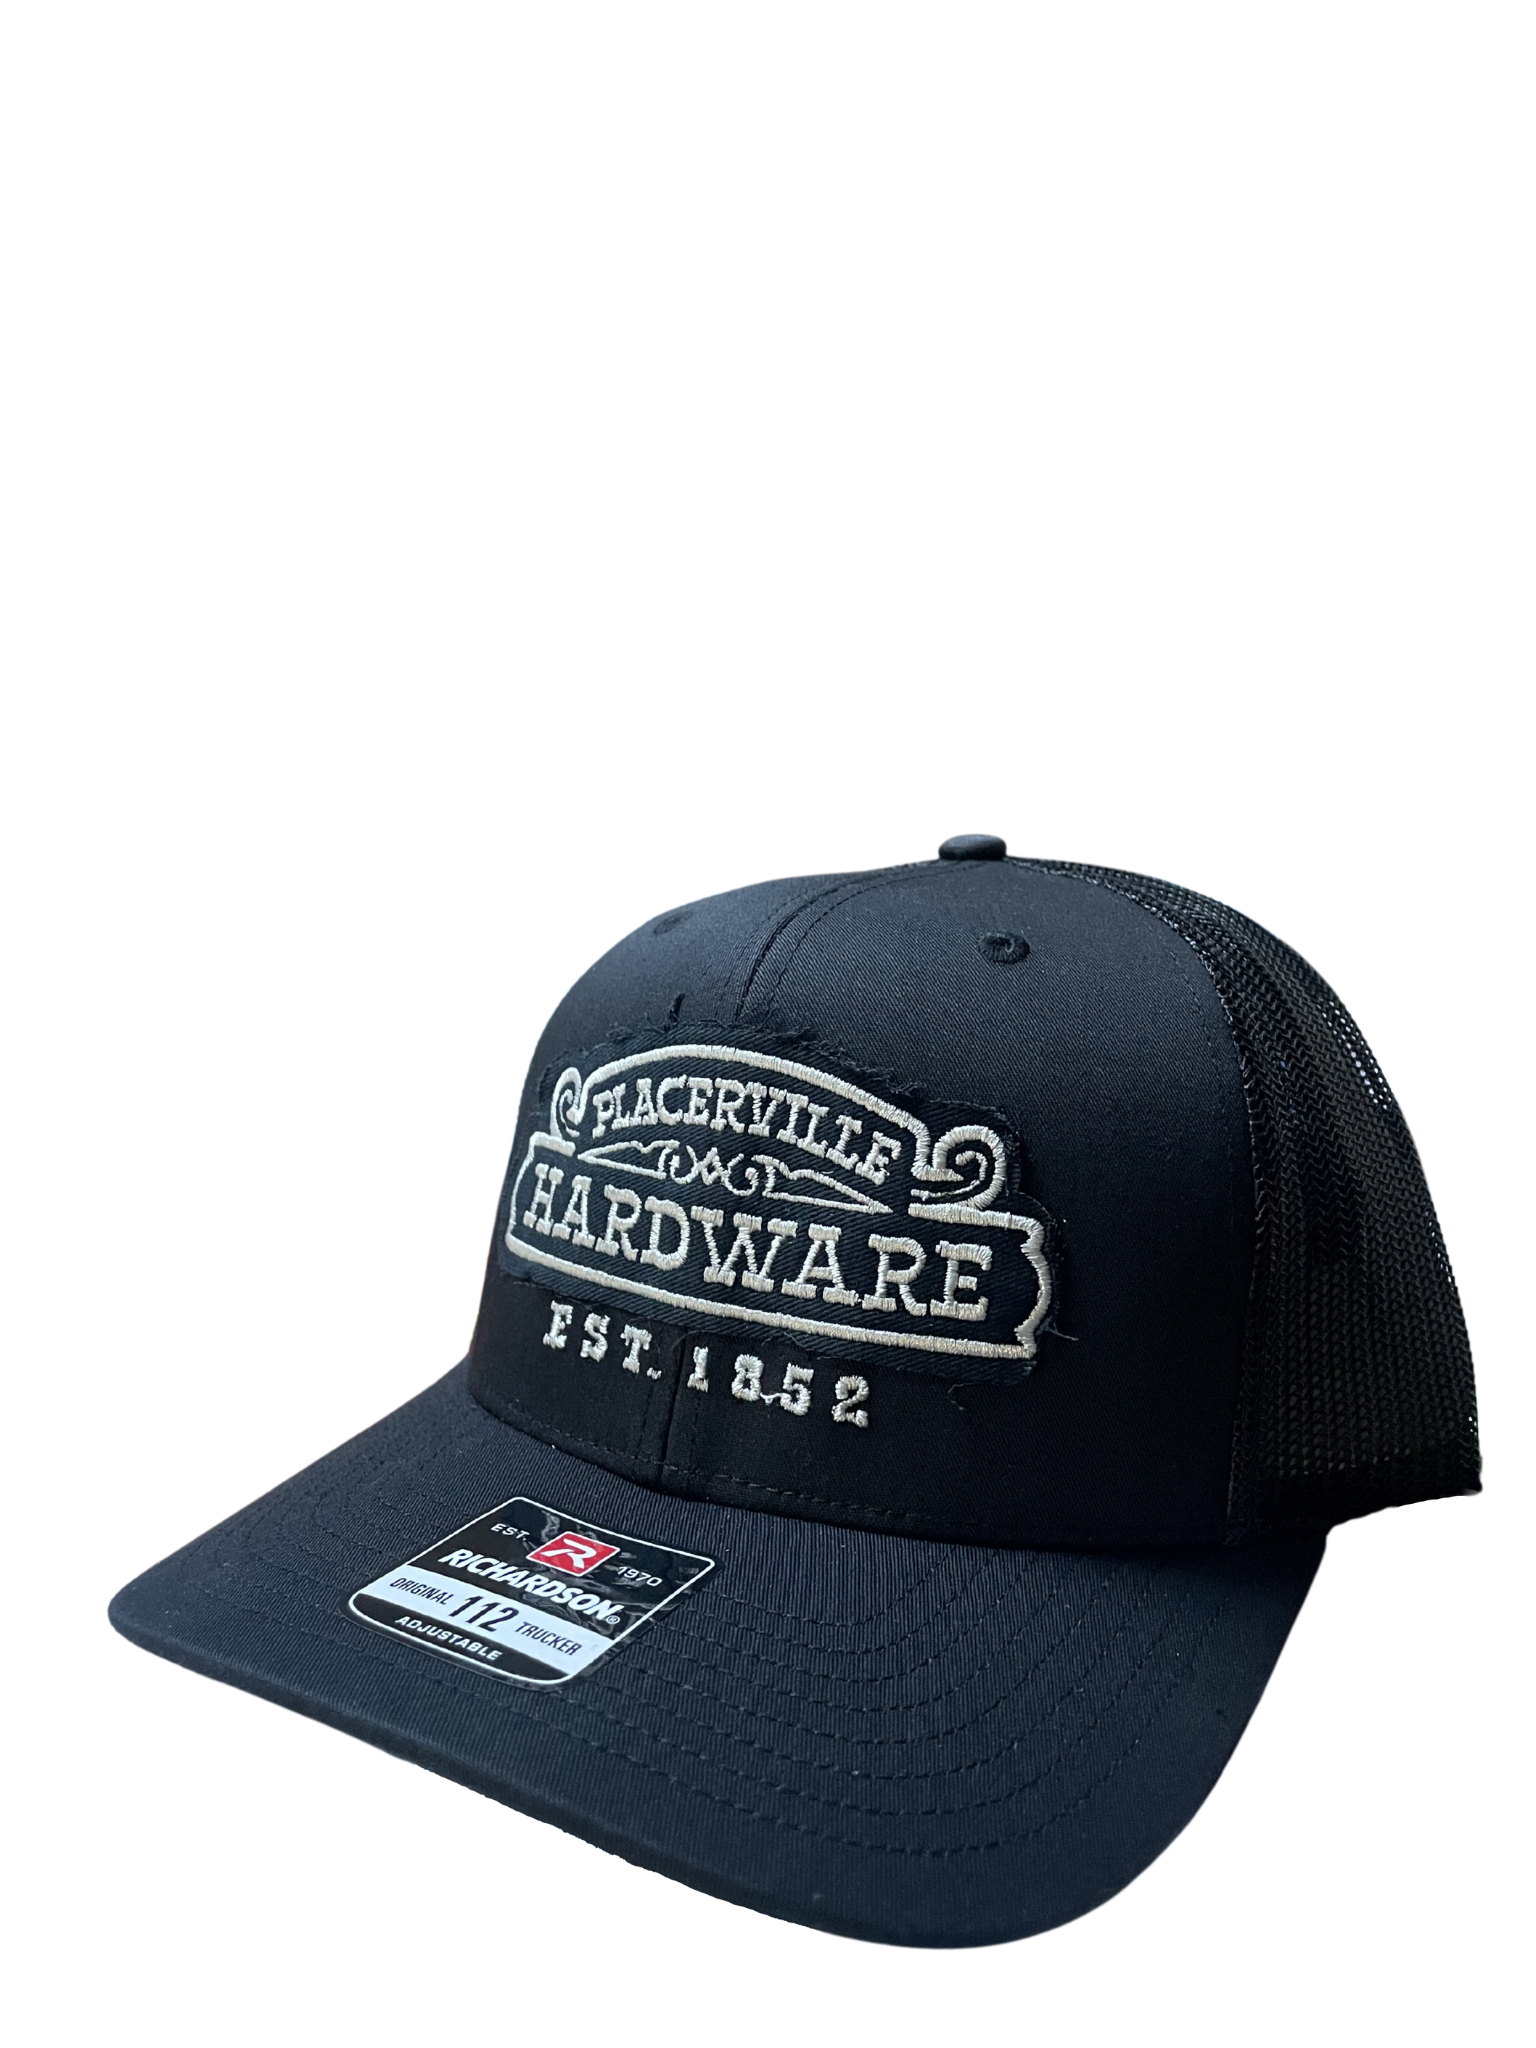 Placerville Hardware Hat - Trucker Style Image